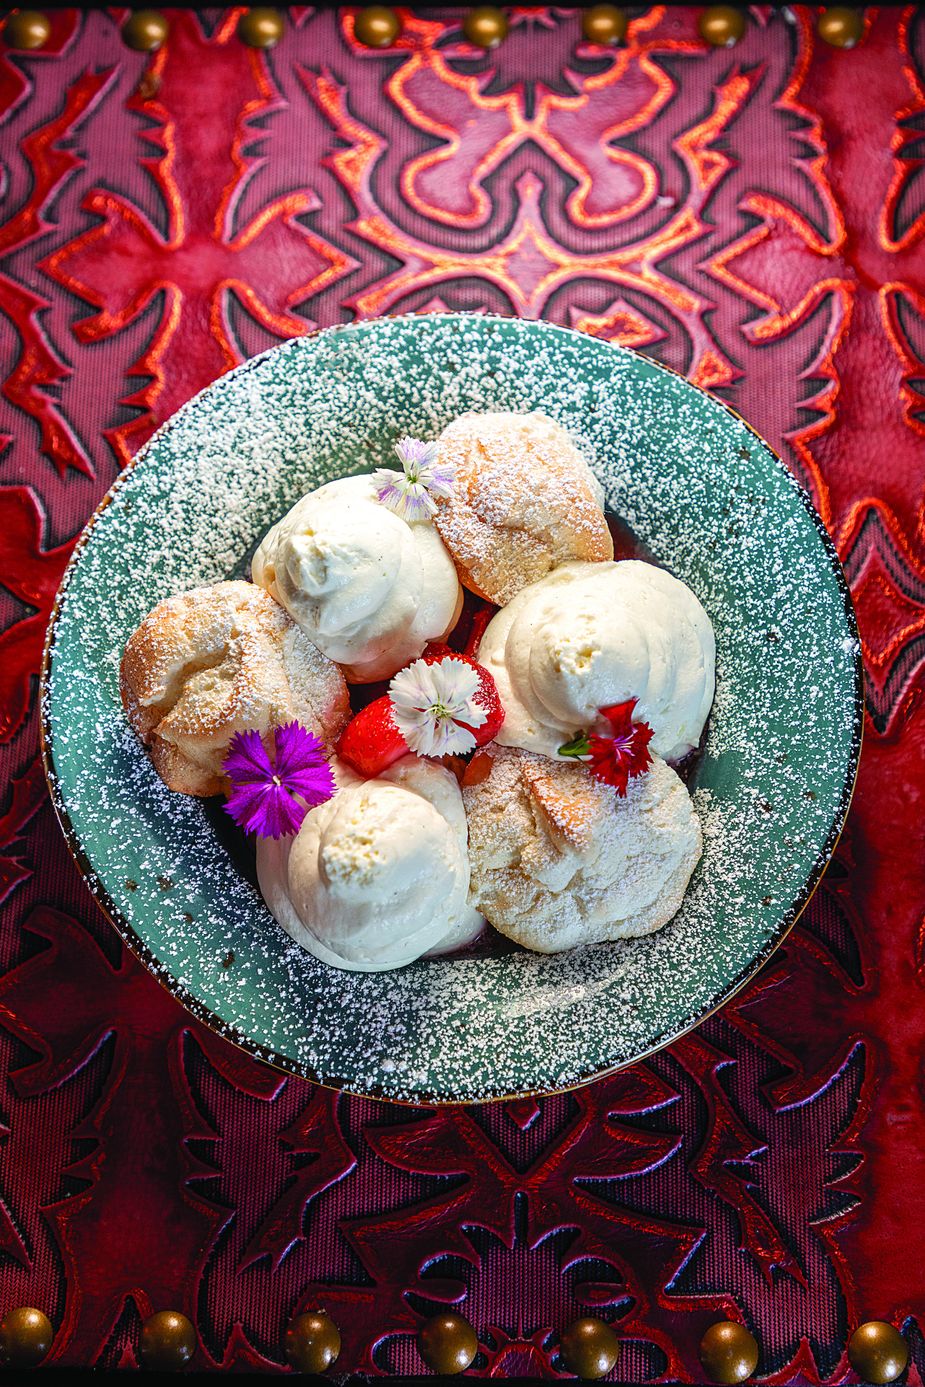 The strawberry shortcake is made with angel food cake dumplings, macerated strawberries, and puffs of whipped cream. Photo by Lori Duckworth